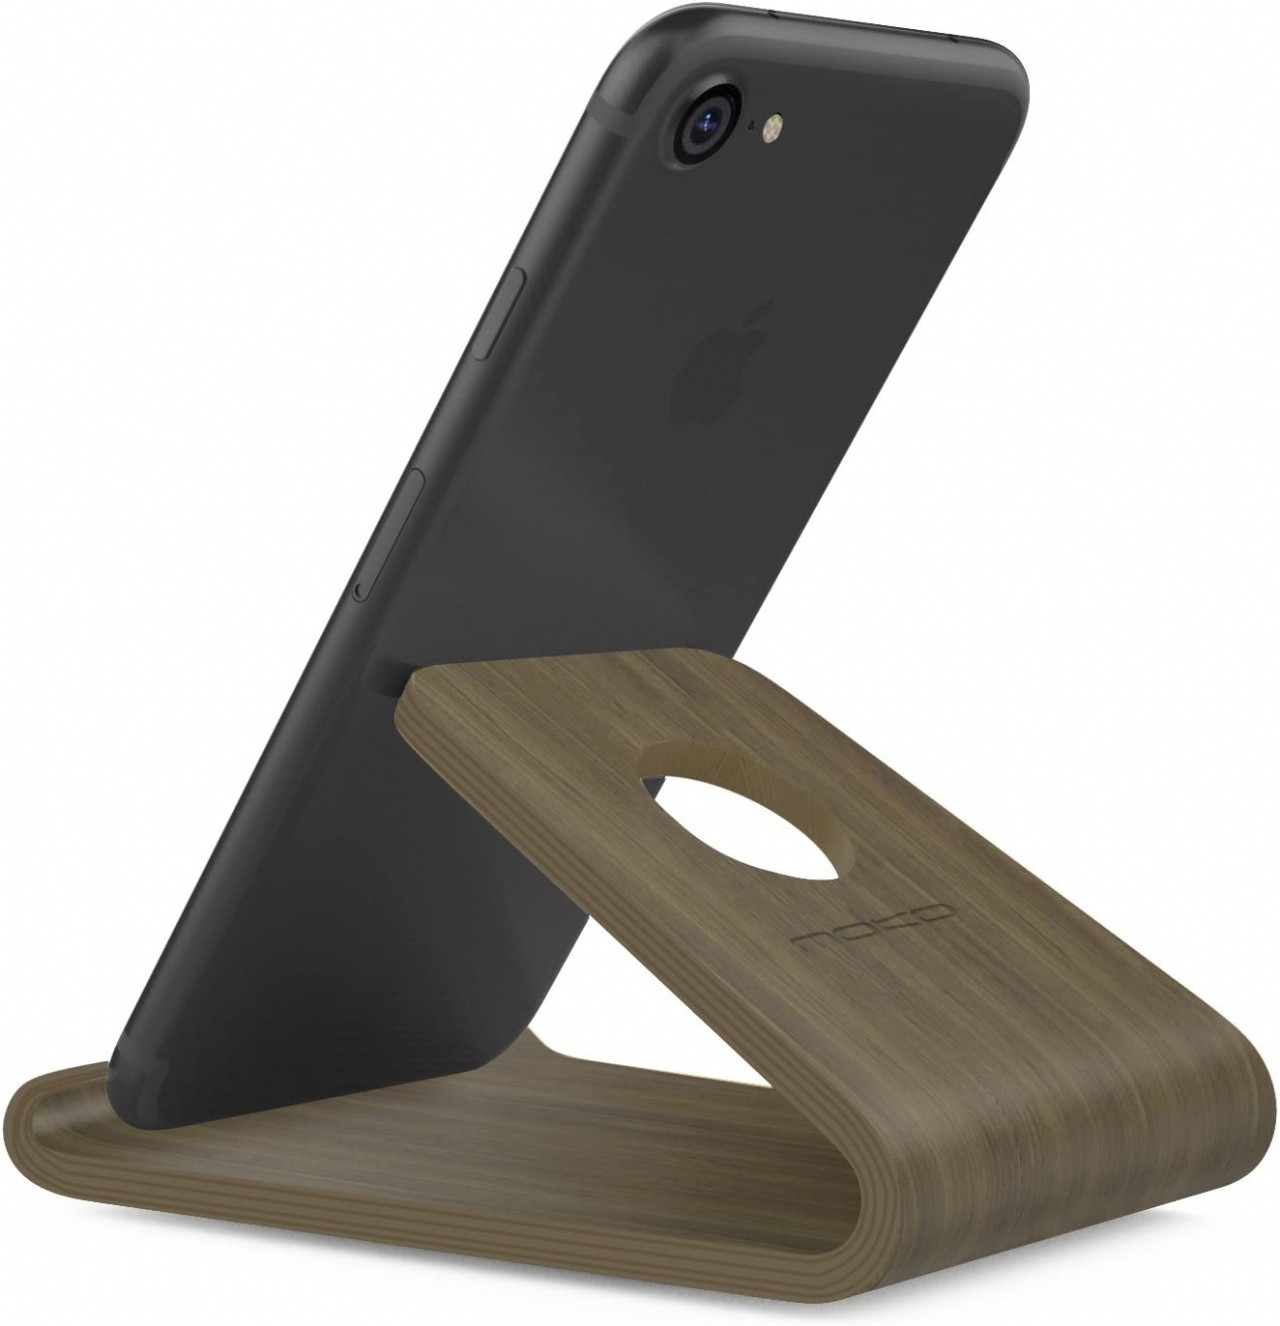 Wooden Cell Phone Stand, Smartphone Desktop Holder, Mobile Phone Holder Cradle, Fits with iPhone 11